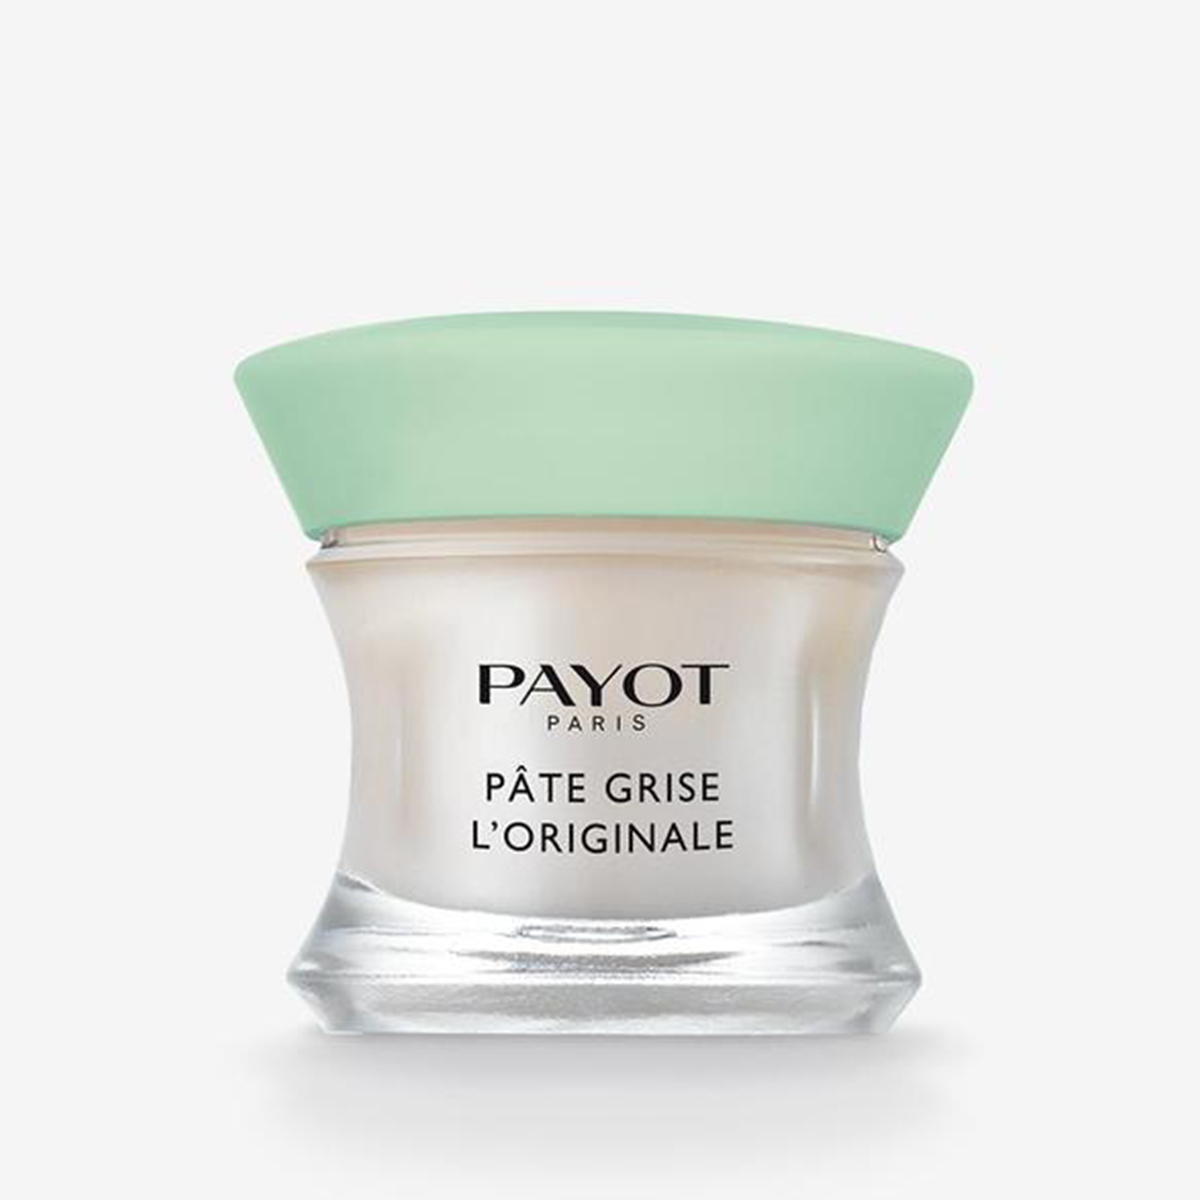 Payot Paris emergency Anti-imperfections care